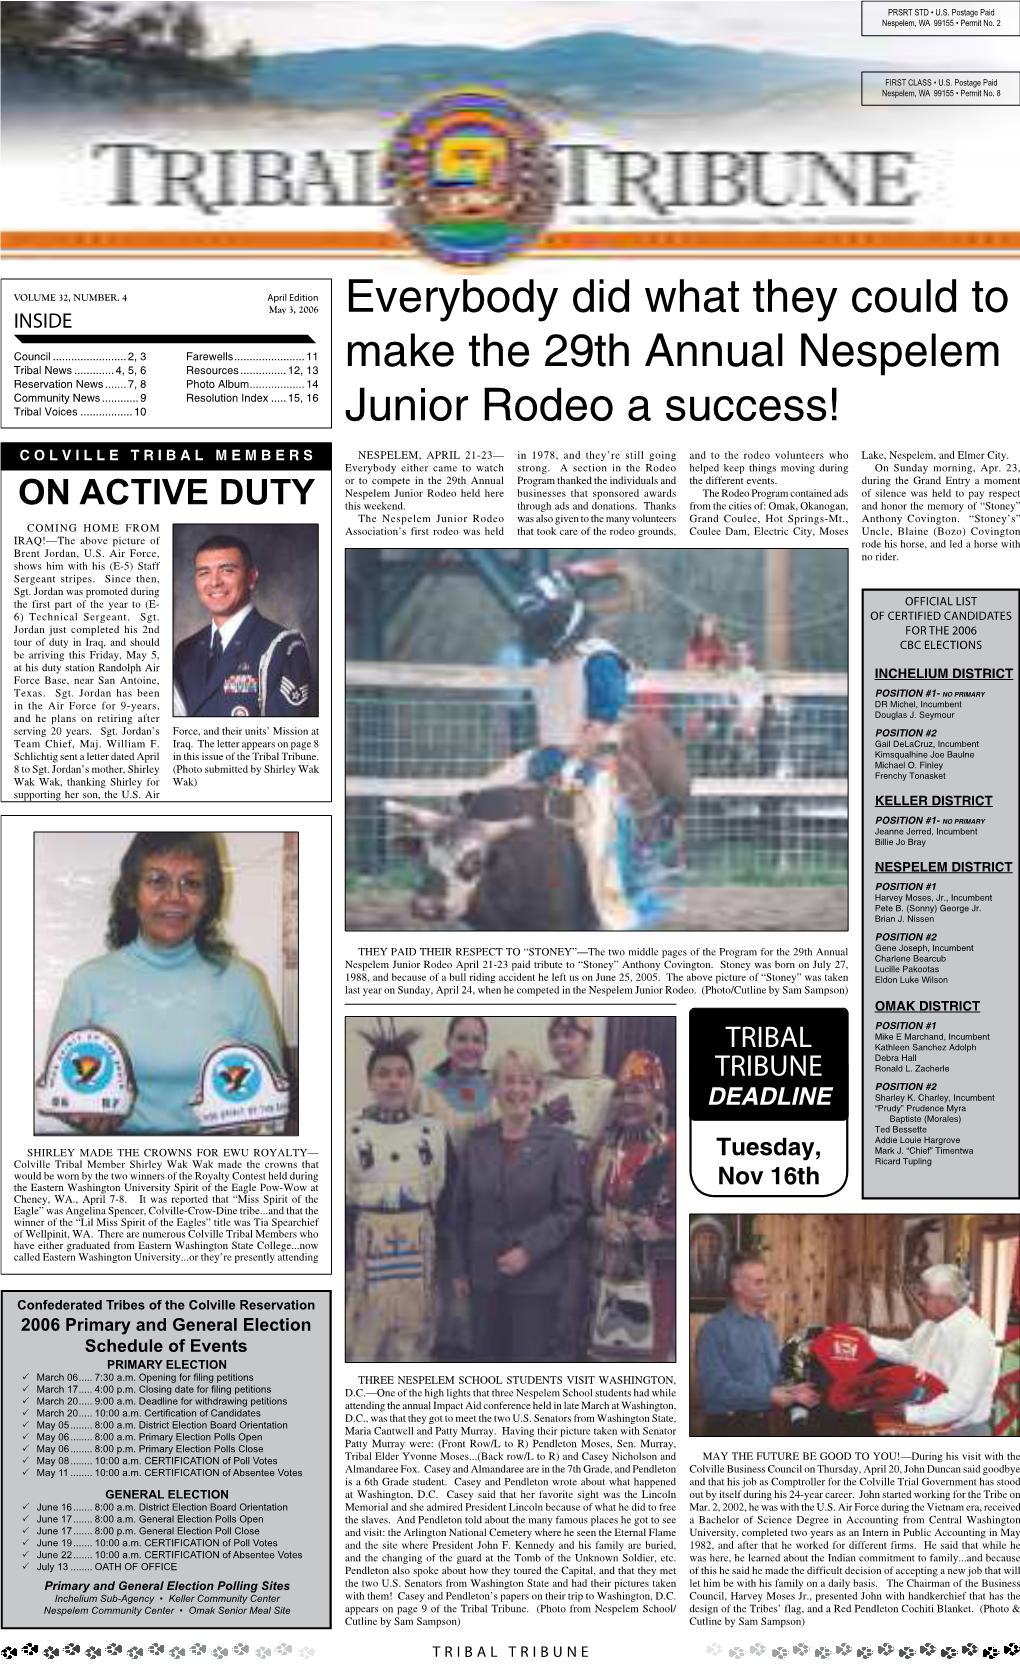 Everybody Did What They Could to Make the 29Th Annual Nespelem